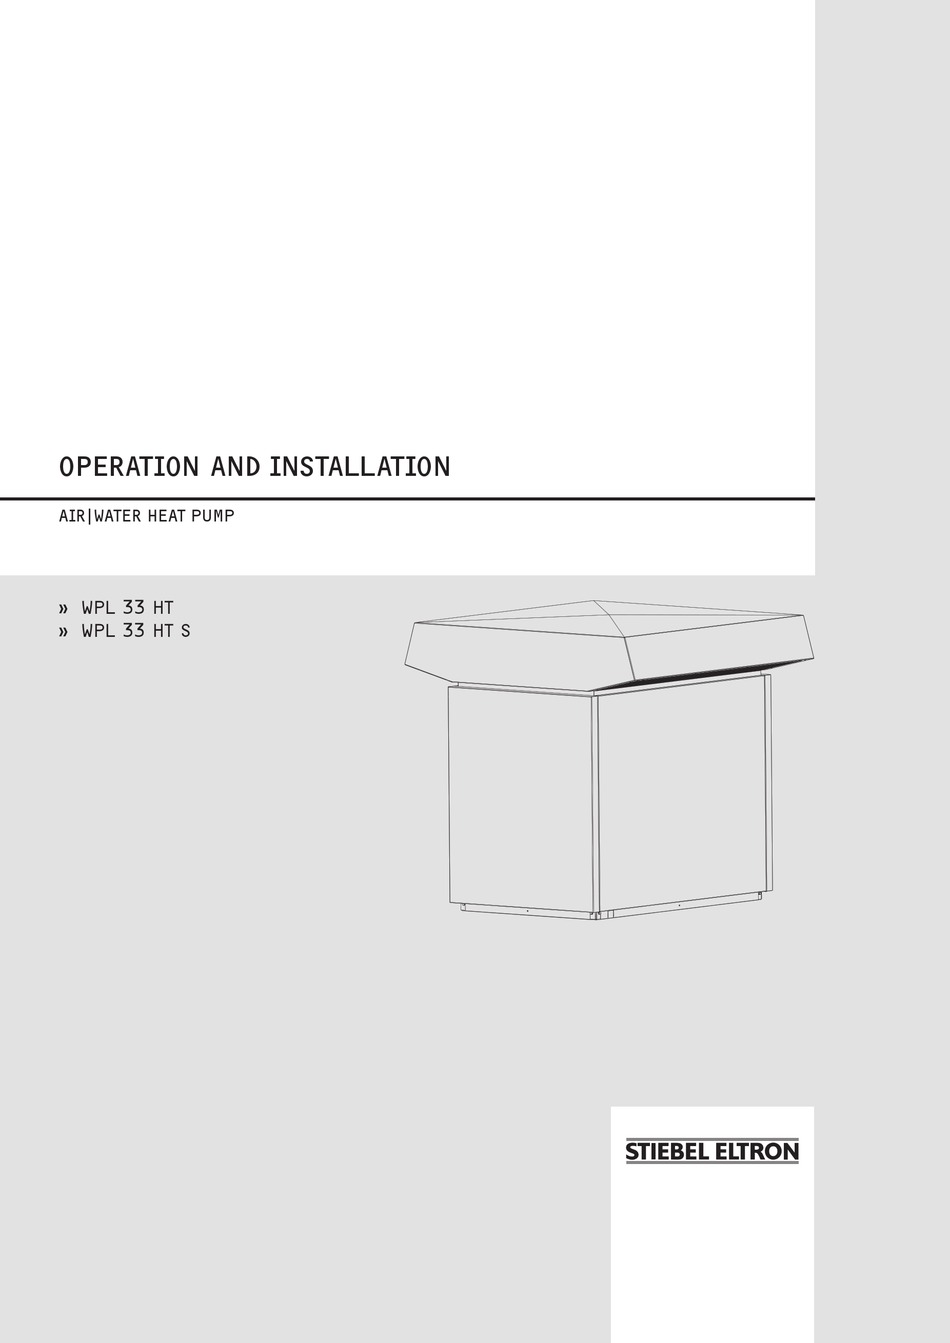 STIEBEL ELTRON WPL 33 HT OPERATION AND INSTALLATION Pdf Download